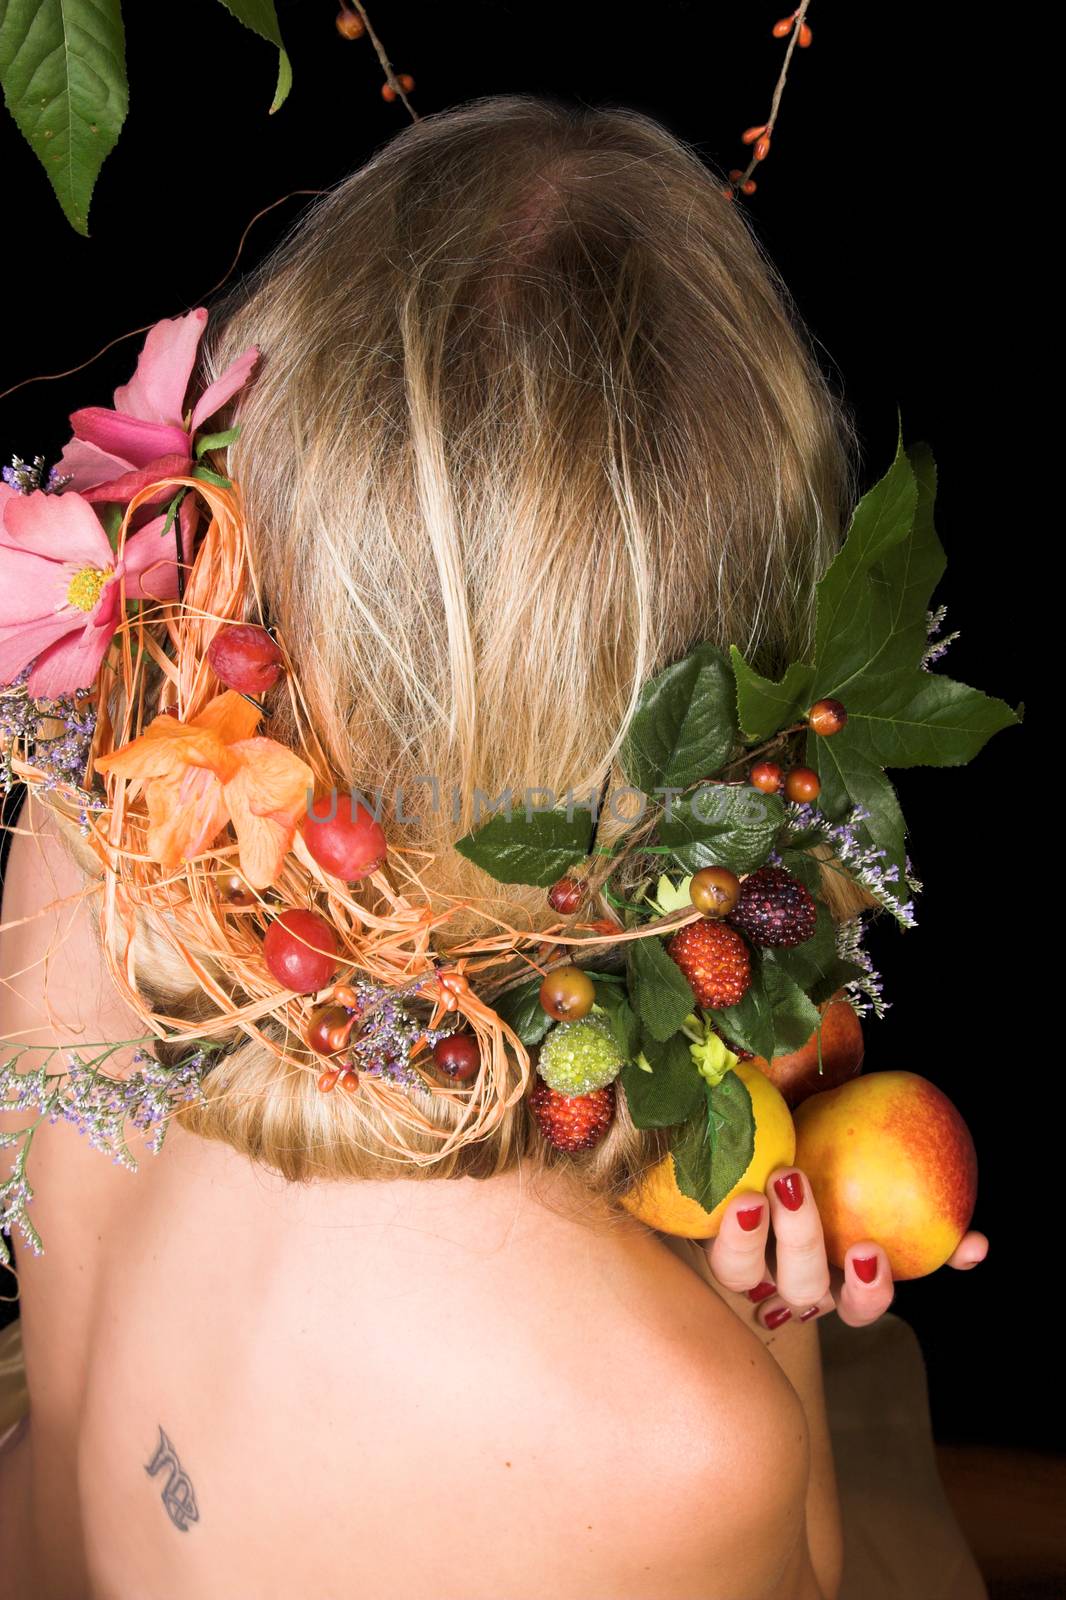 Beautiful young blond model with flowers in her hair